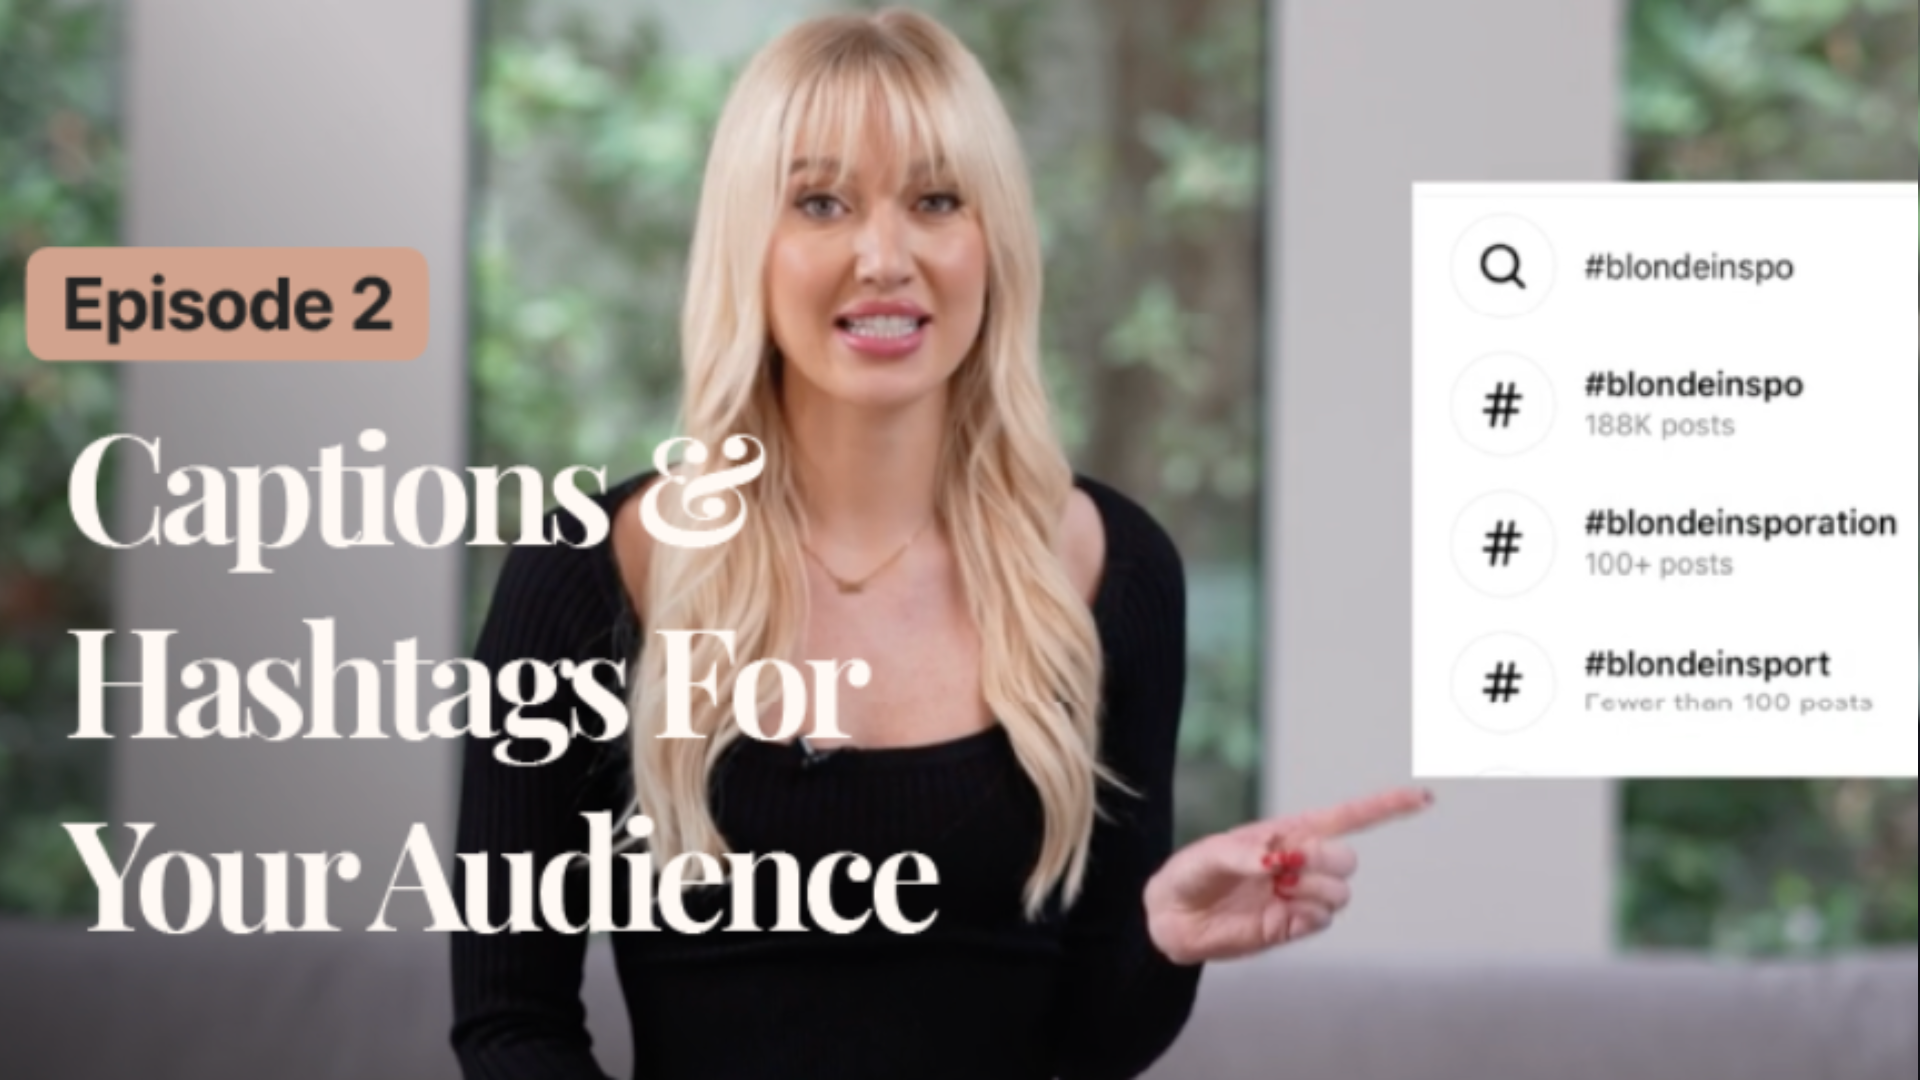 Captions & Hashtags For Your Audience